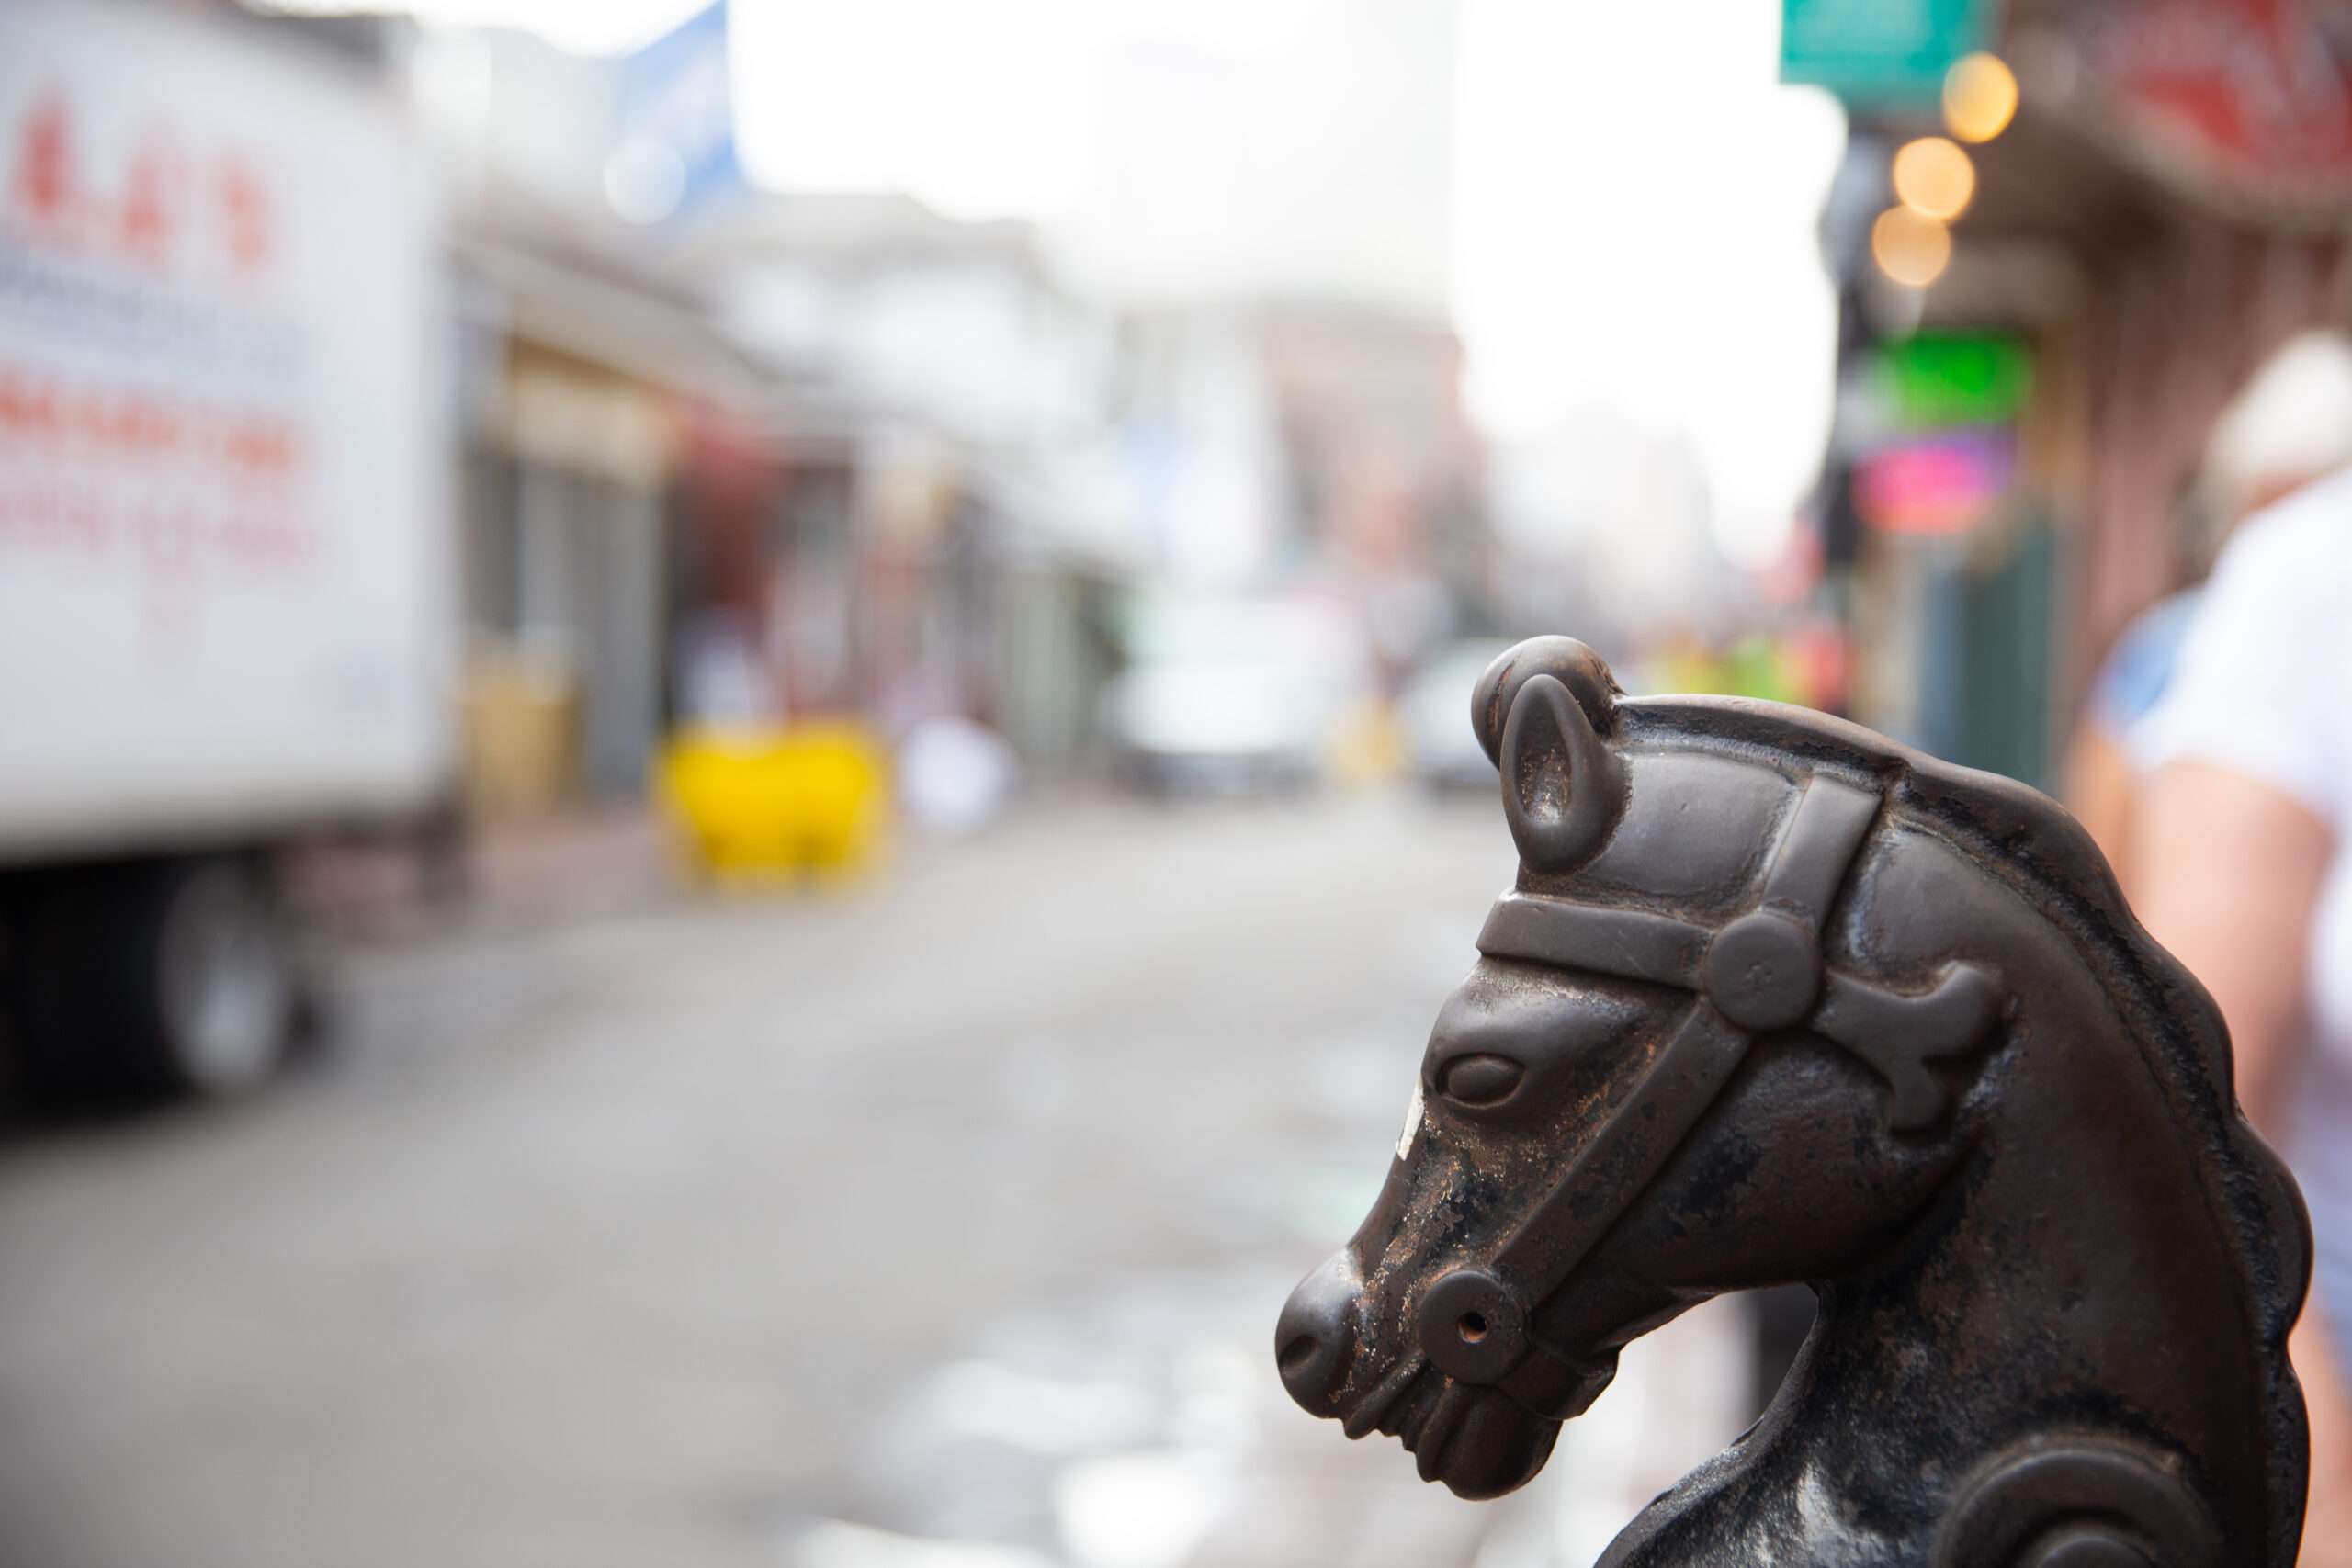 A close up of the iconic iron horse heads that line the streets in New Orleans.